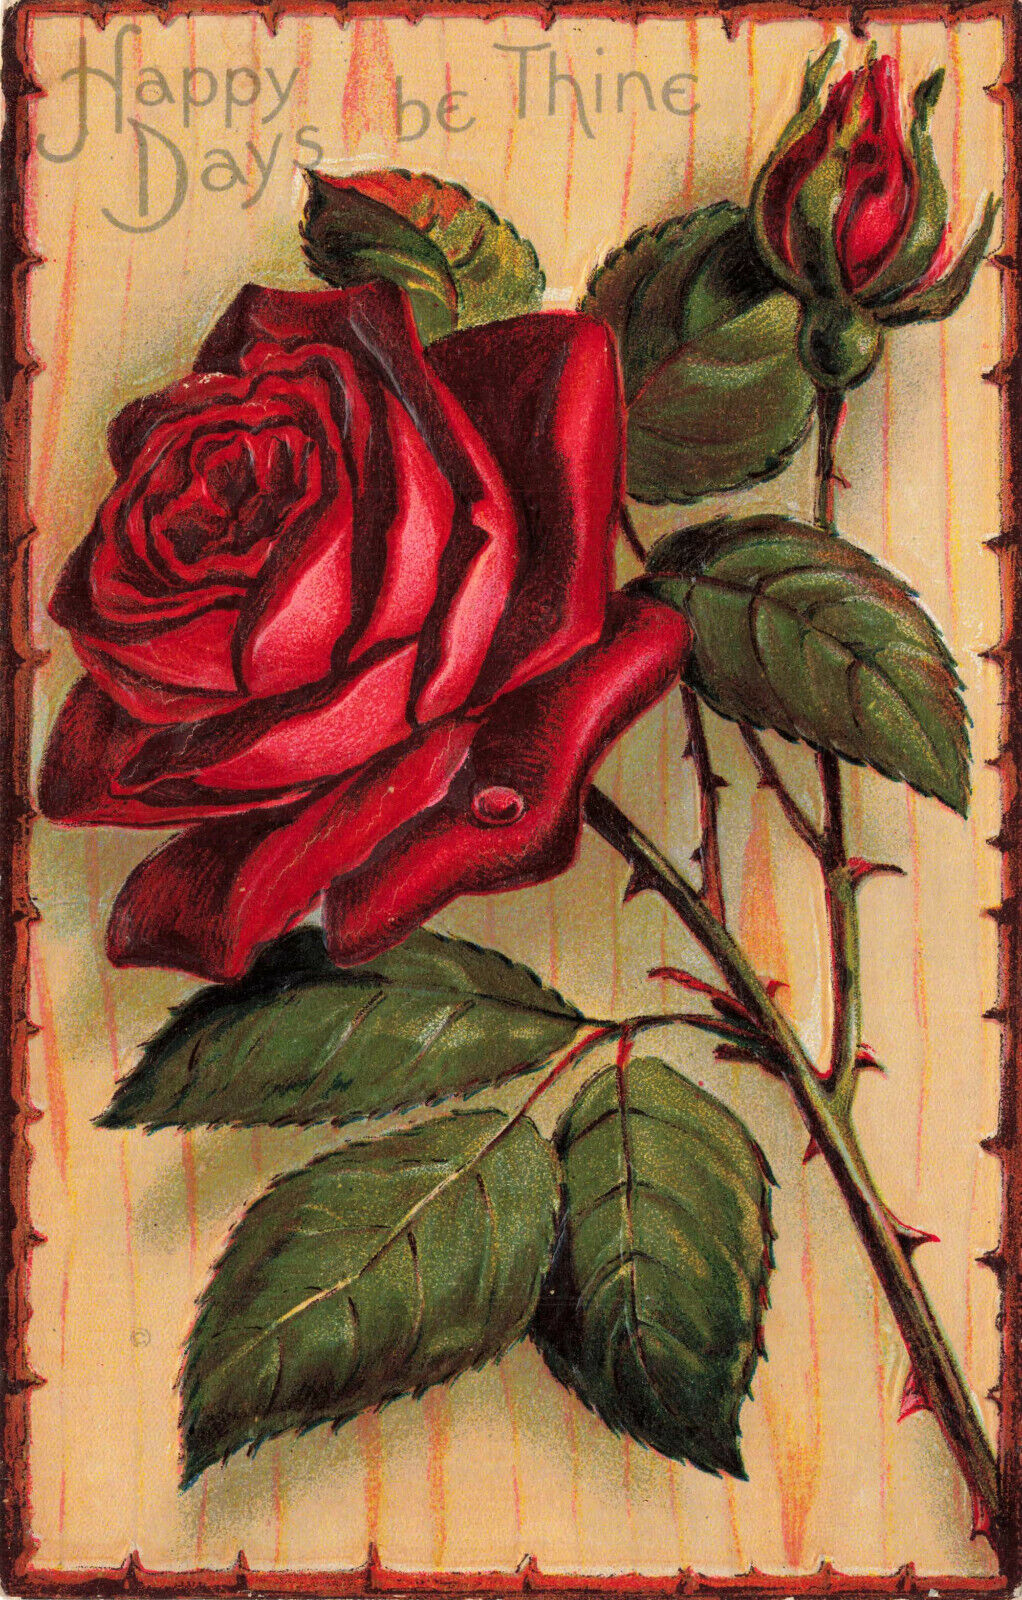 LOVELY VINTAGE RED ROSE GREETING CARD HAPPY DAYS BE THINE 022322 R